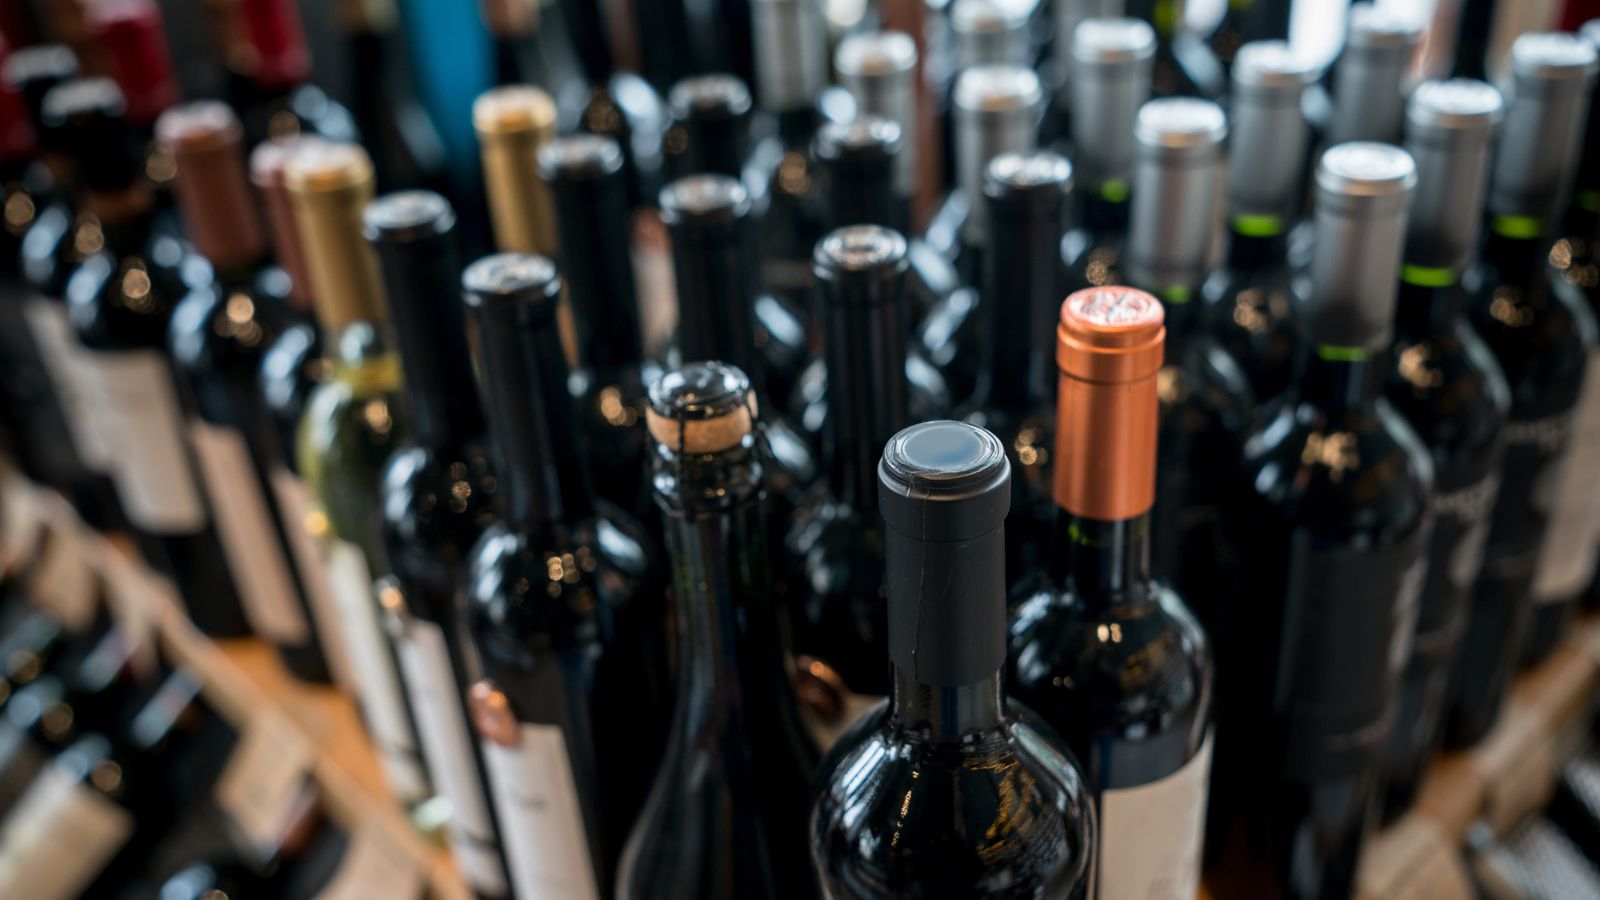 A year of free wine is on offer for customers who help retailer with a pretty unusual request